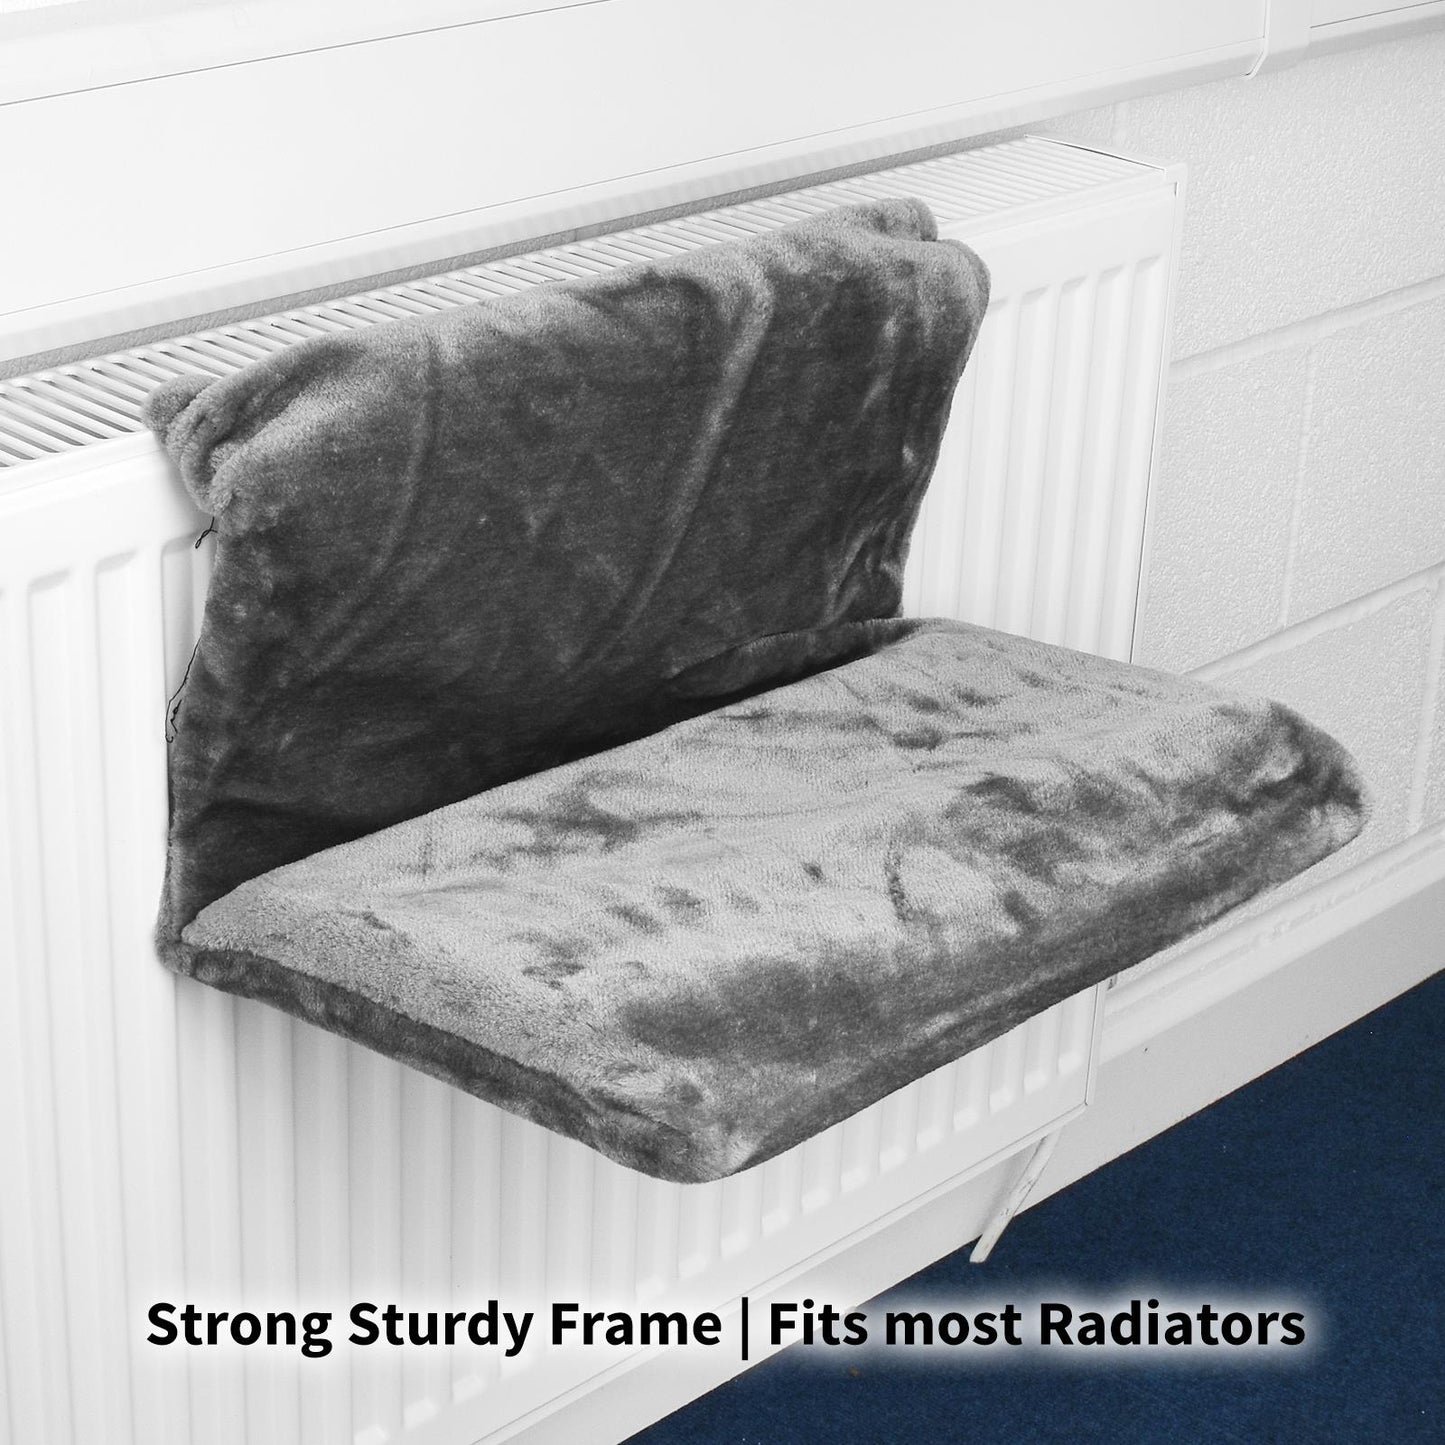 Cat Radiator Bed With Warm Fleece Lining And Hammock For Sleeping And Lounging